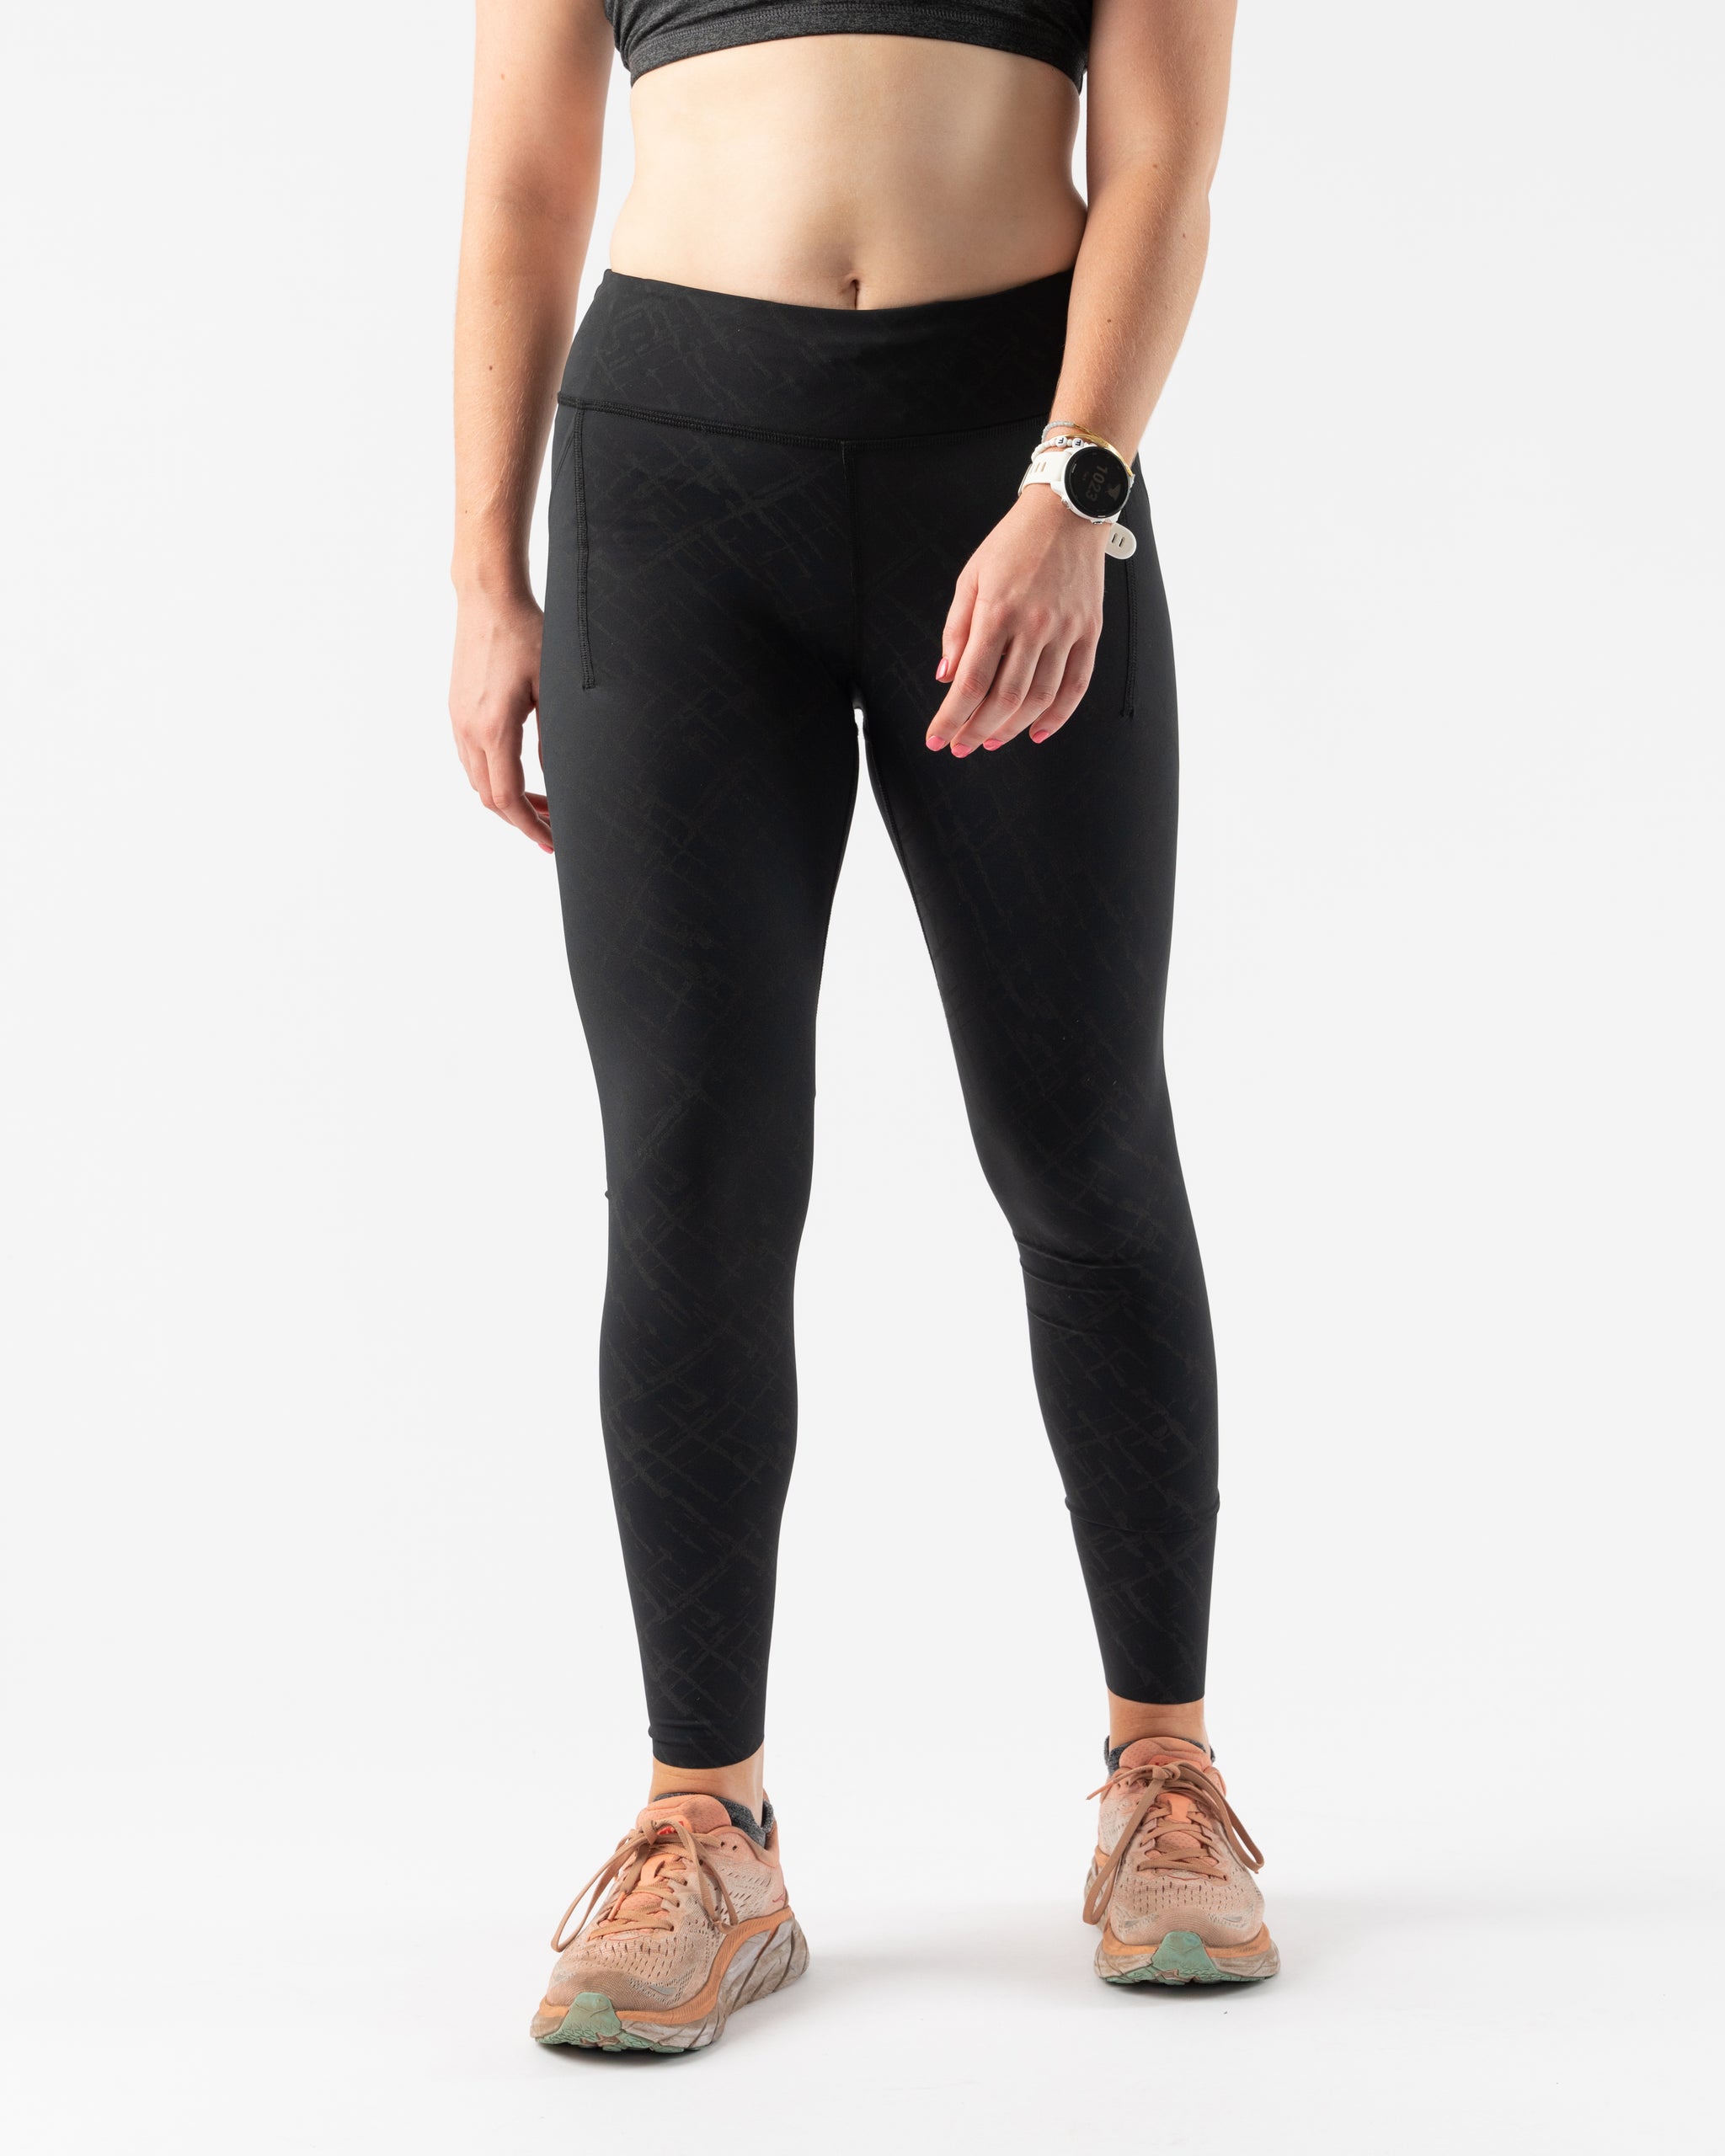 Lululemon Fast And Free Short 10 *Non-Reflective - Cherry Tint